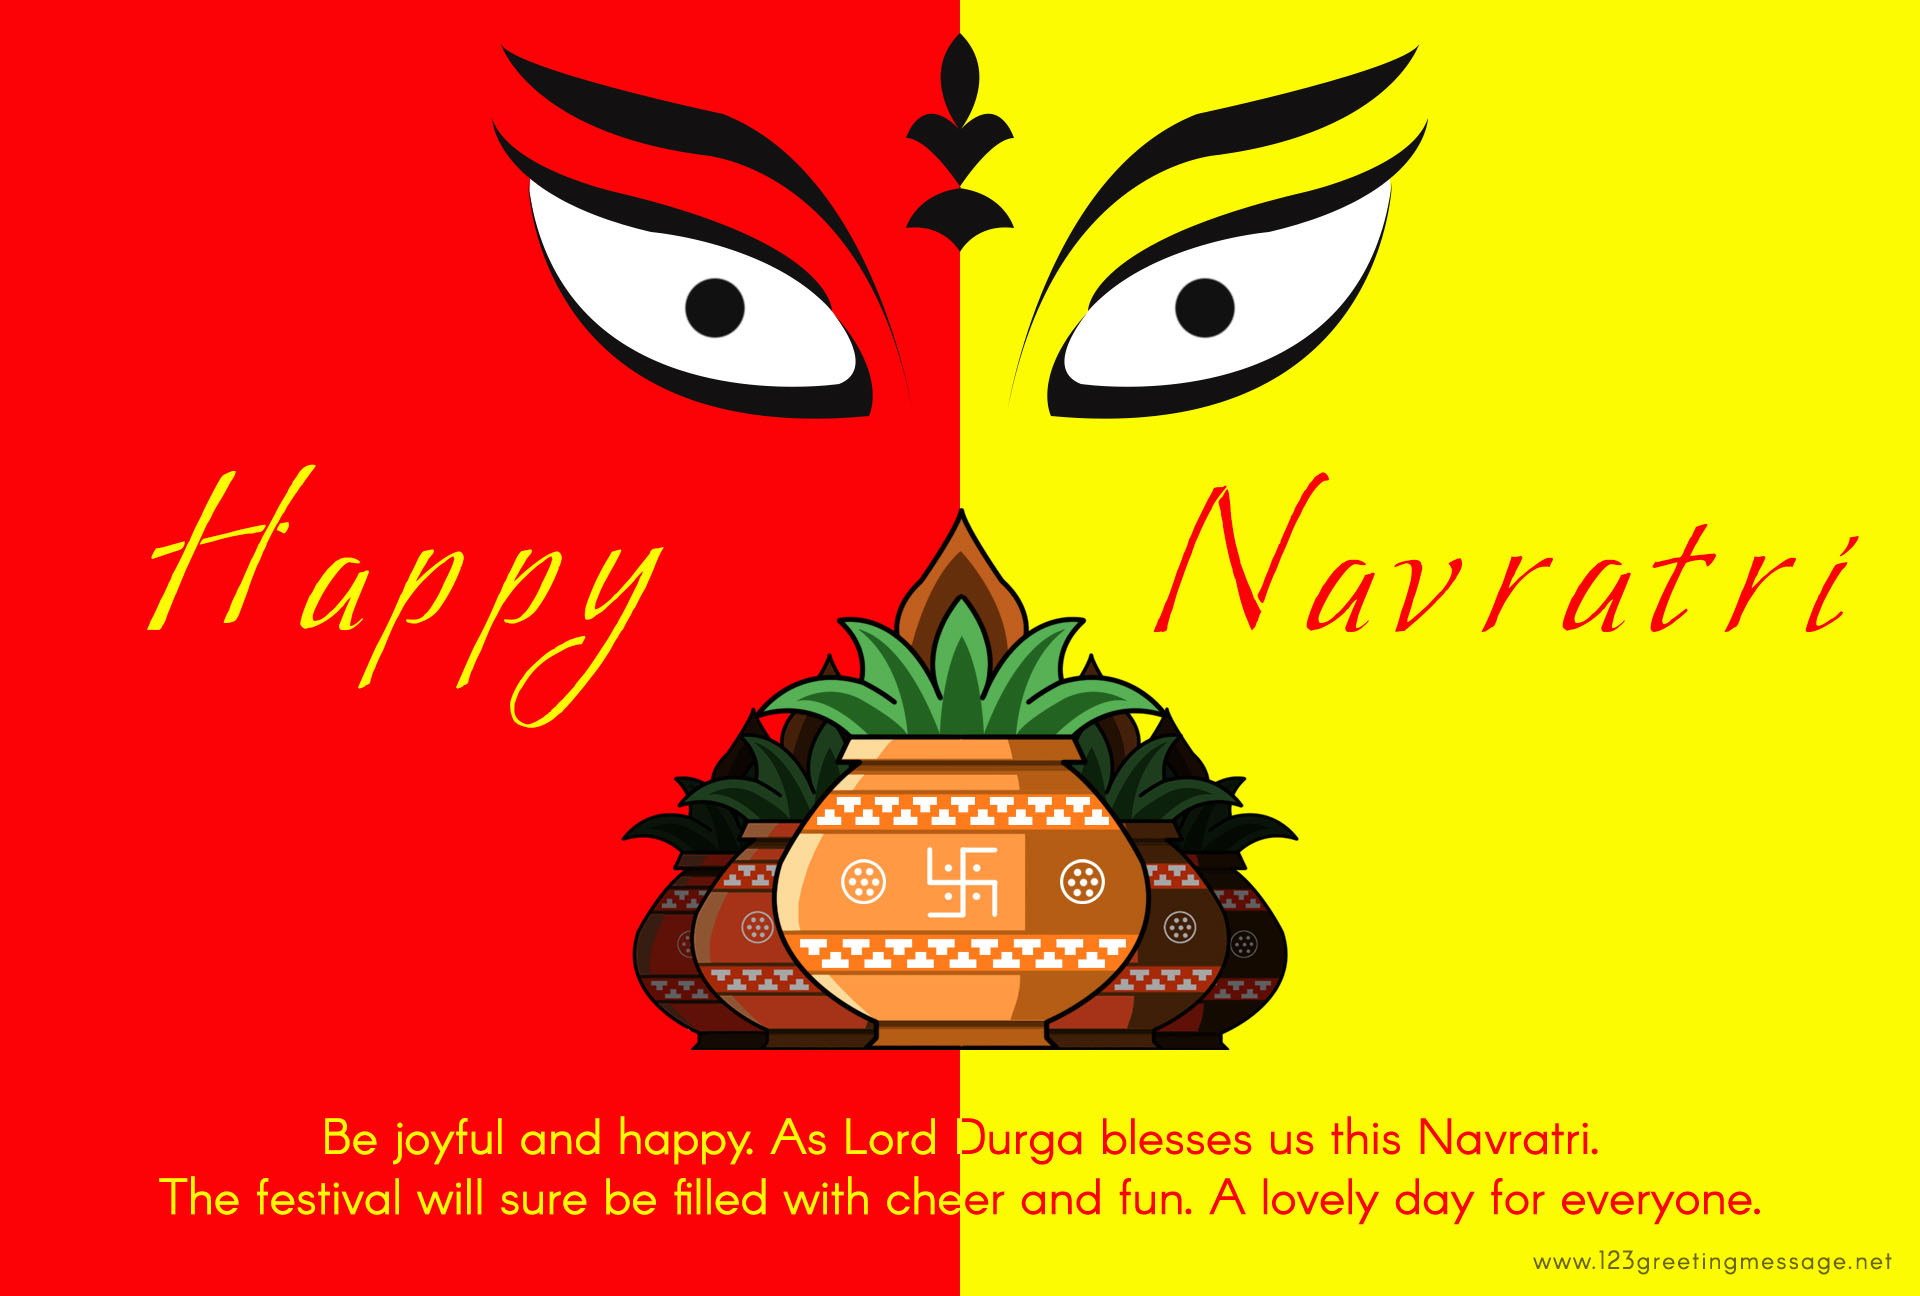 Happy Navratri Images for Whatsapp